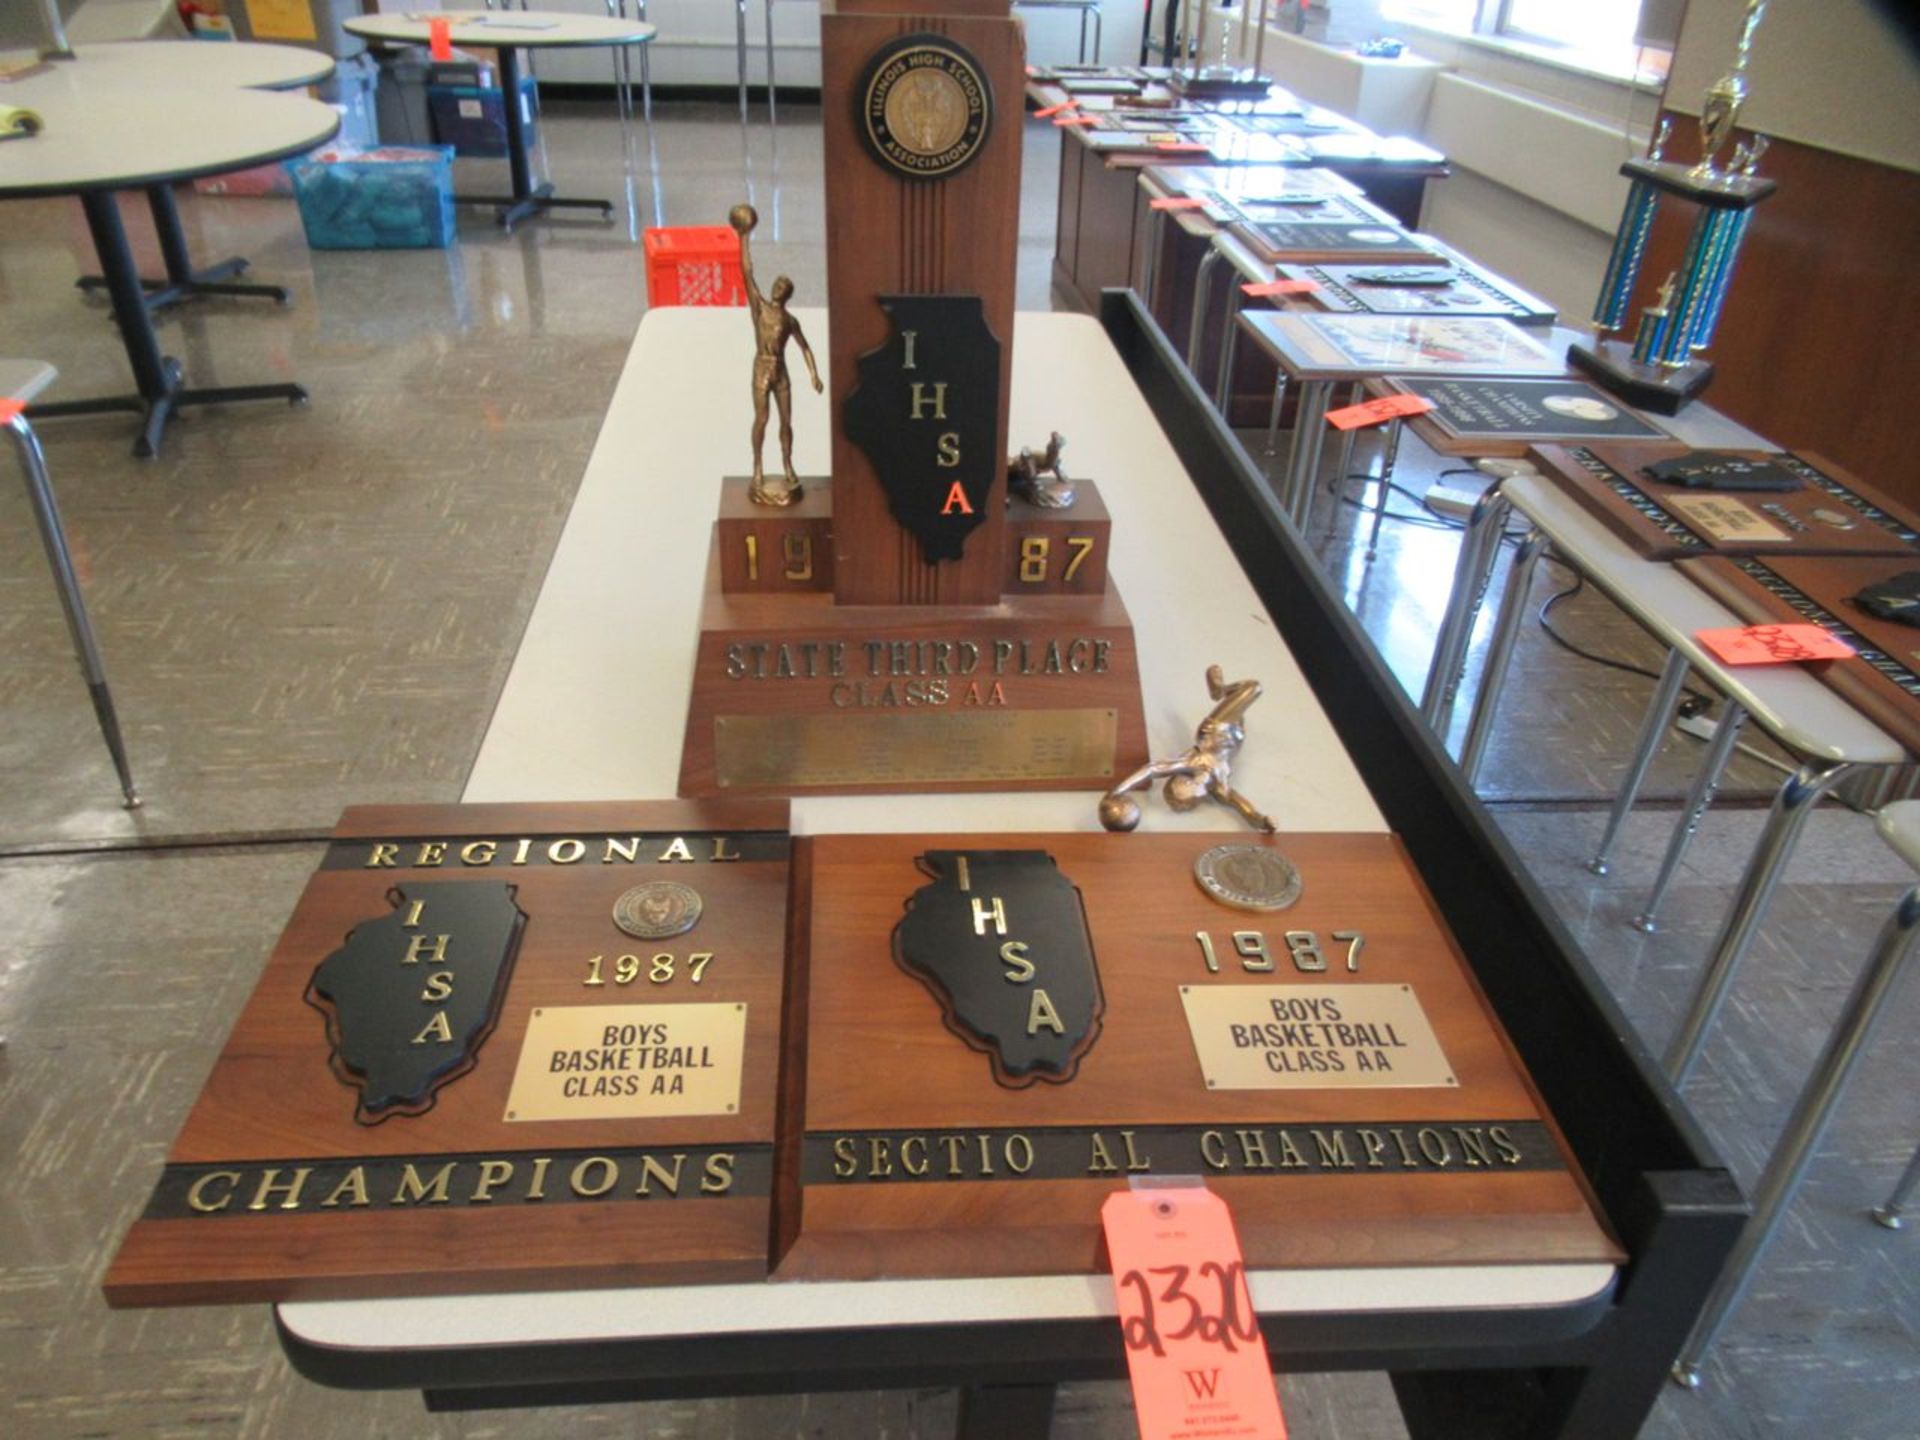 1987 IHSA Class AA State Third Place Trophy (Broke), 1987 IHSA Class AA State Sectional Champions